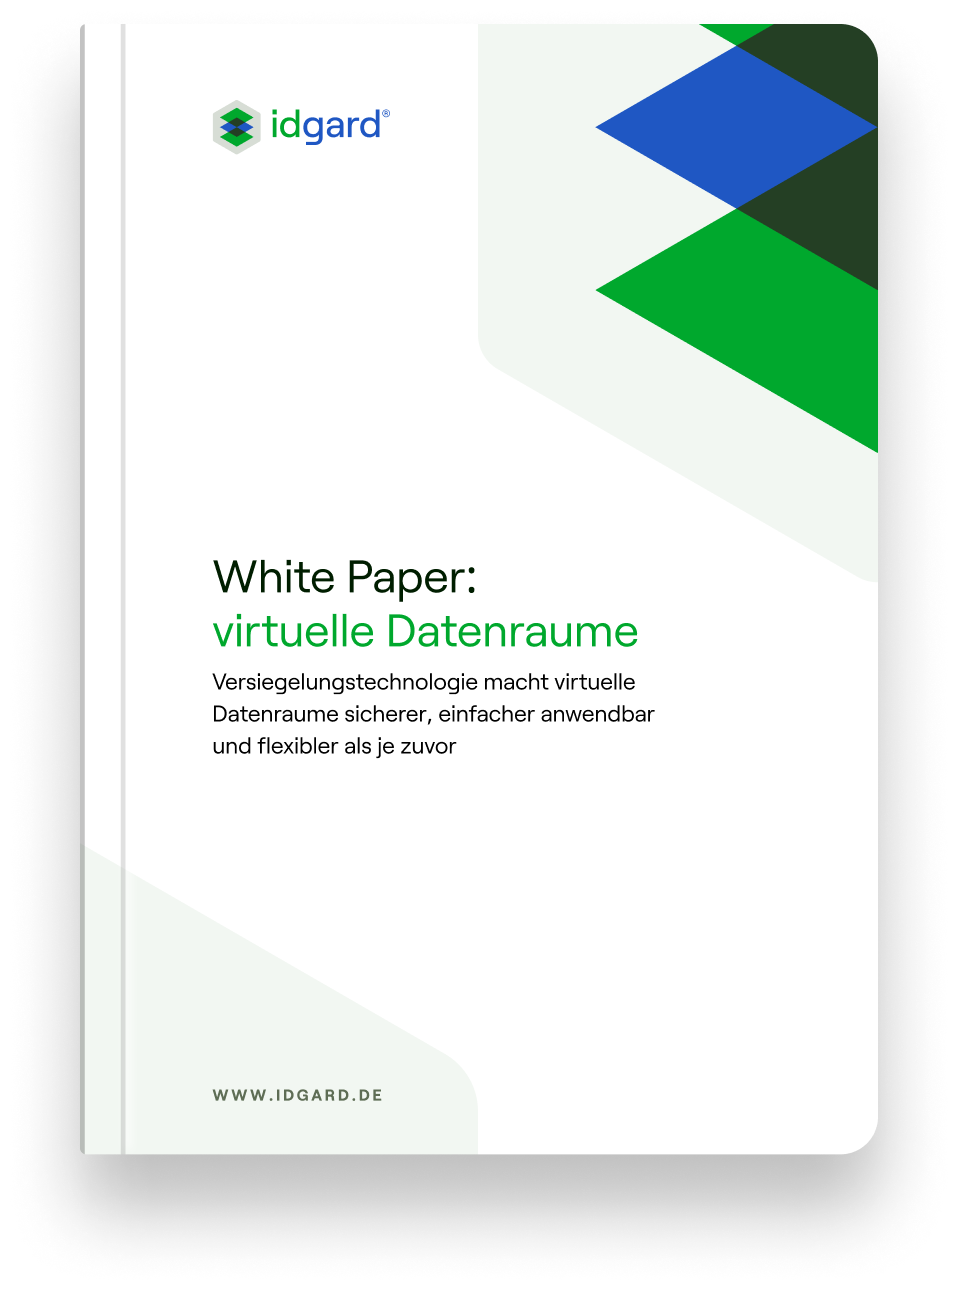 whitepaper-cover-example